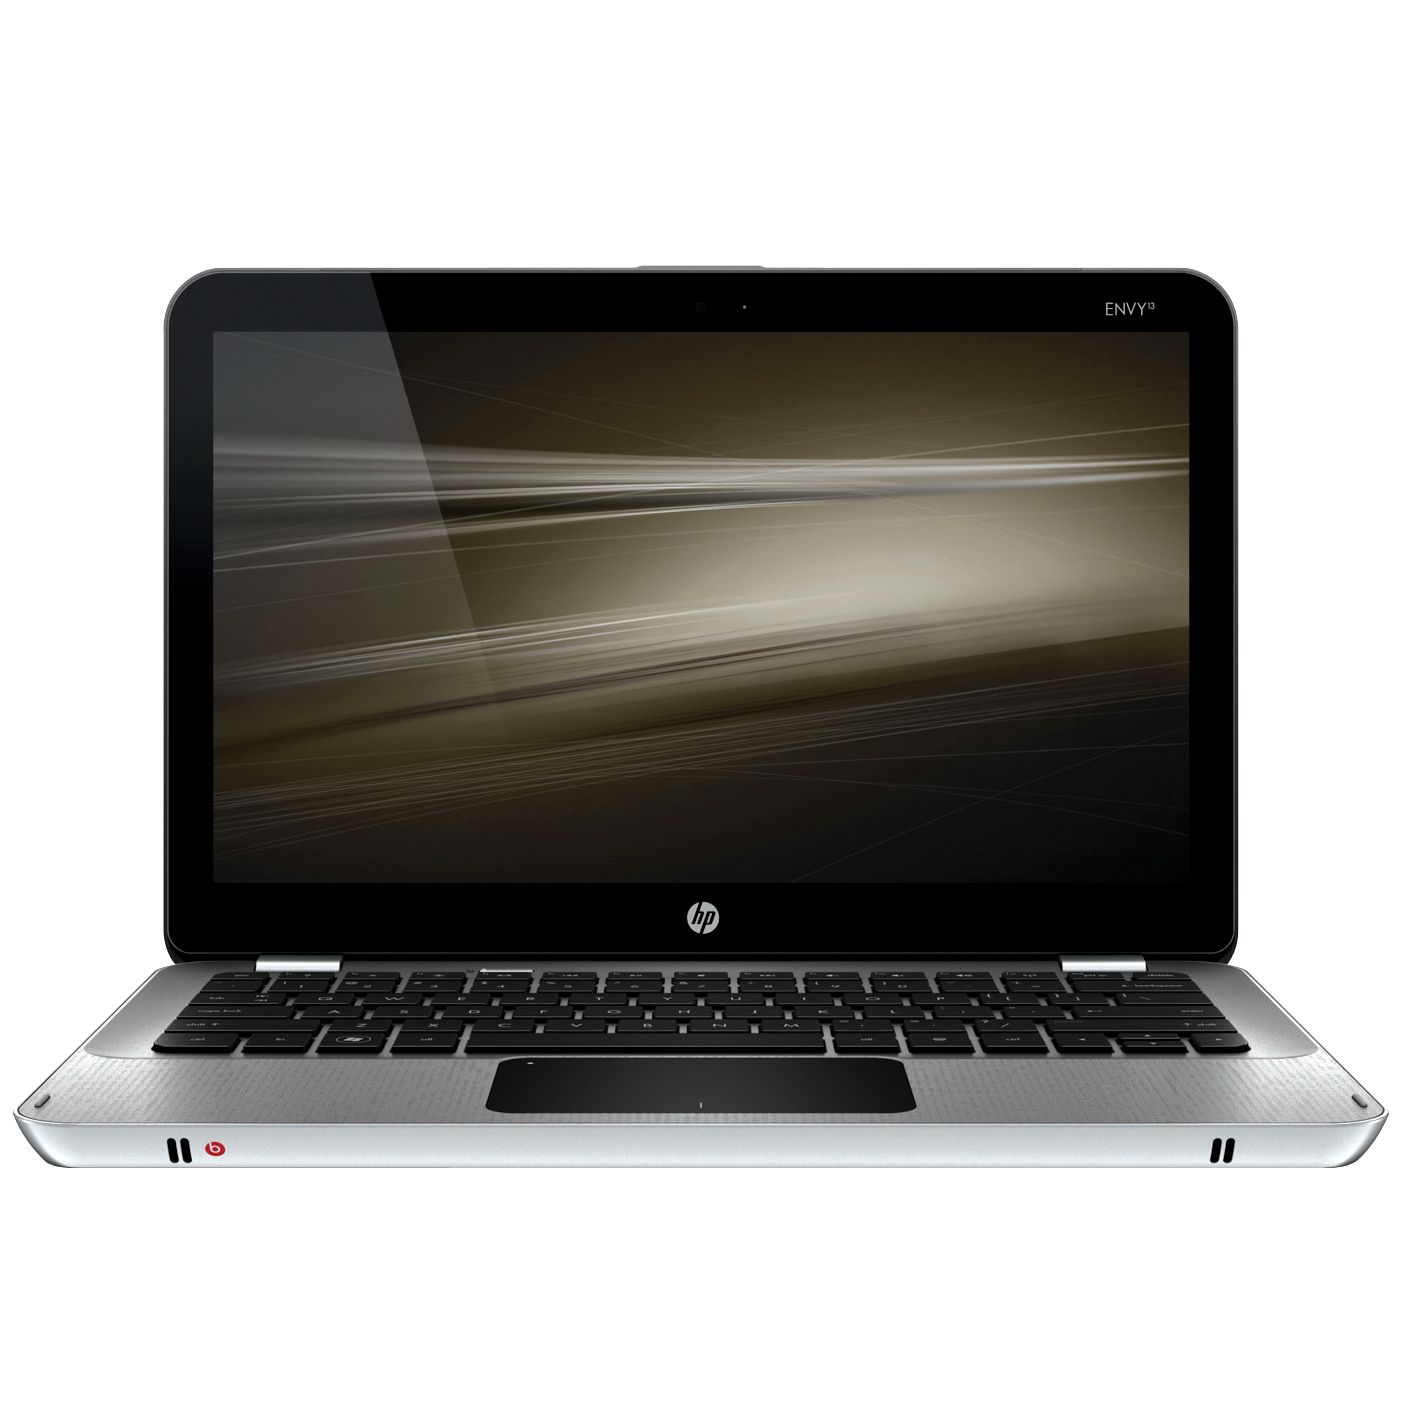 HP Envy 13-1100EA Laptop, Intel Core 2 Duo, 250GB, 2.13GHz, 3GB RAM with 13.1 Inch Display at John Lewis